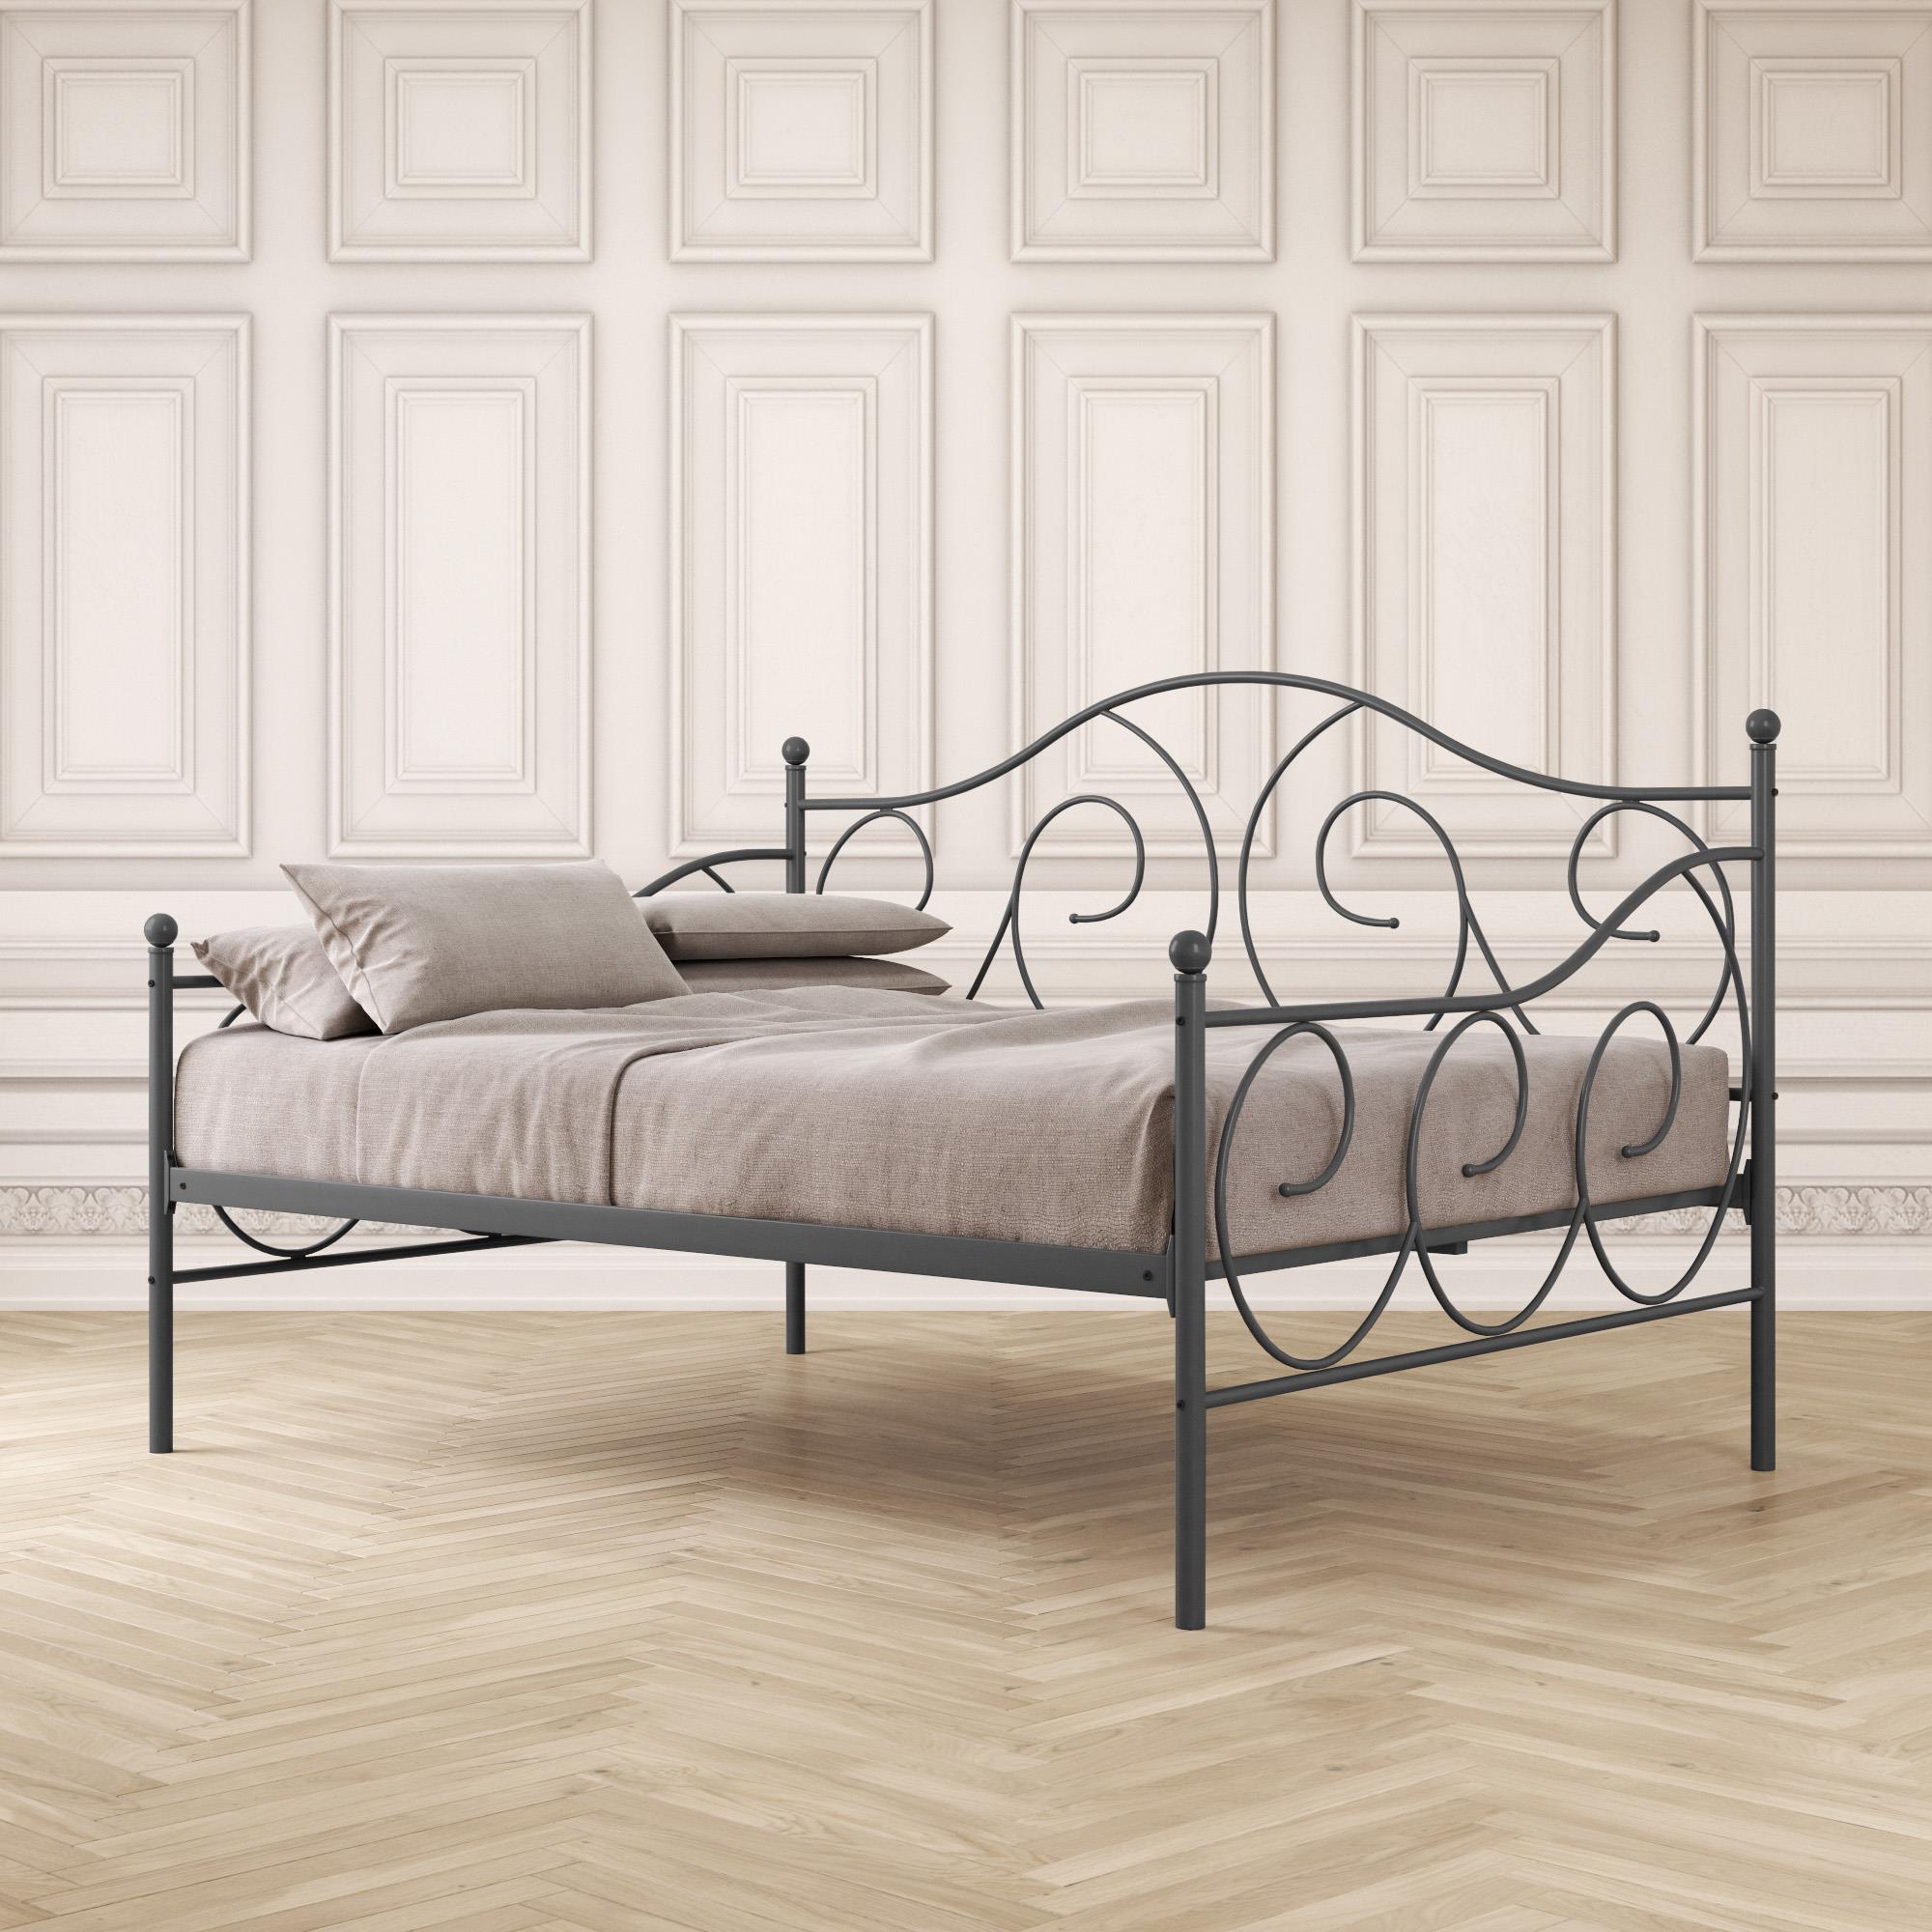 DHP Victoria Metal Daybed, Full, Pewter - image 4 of 24